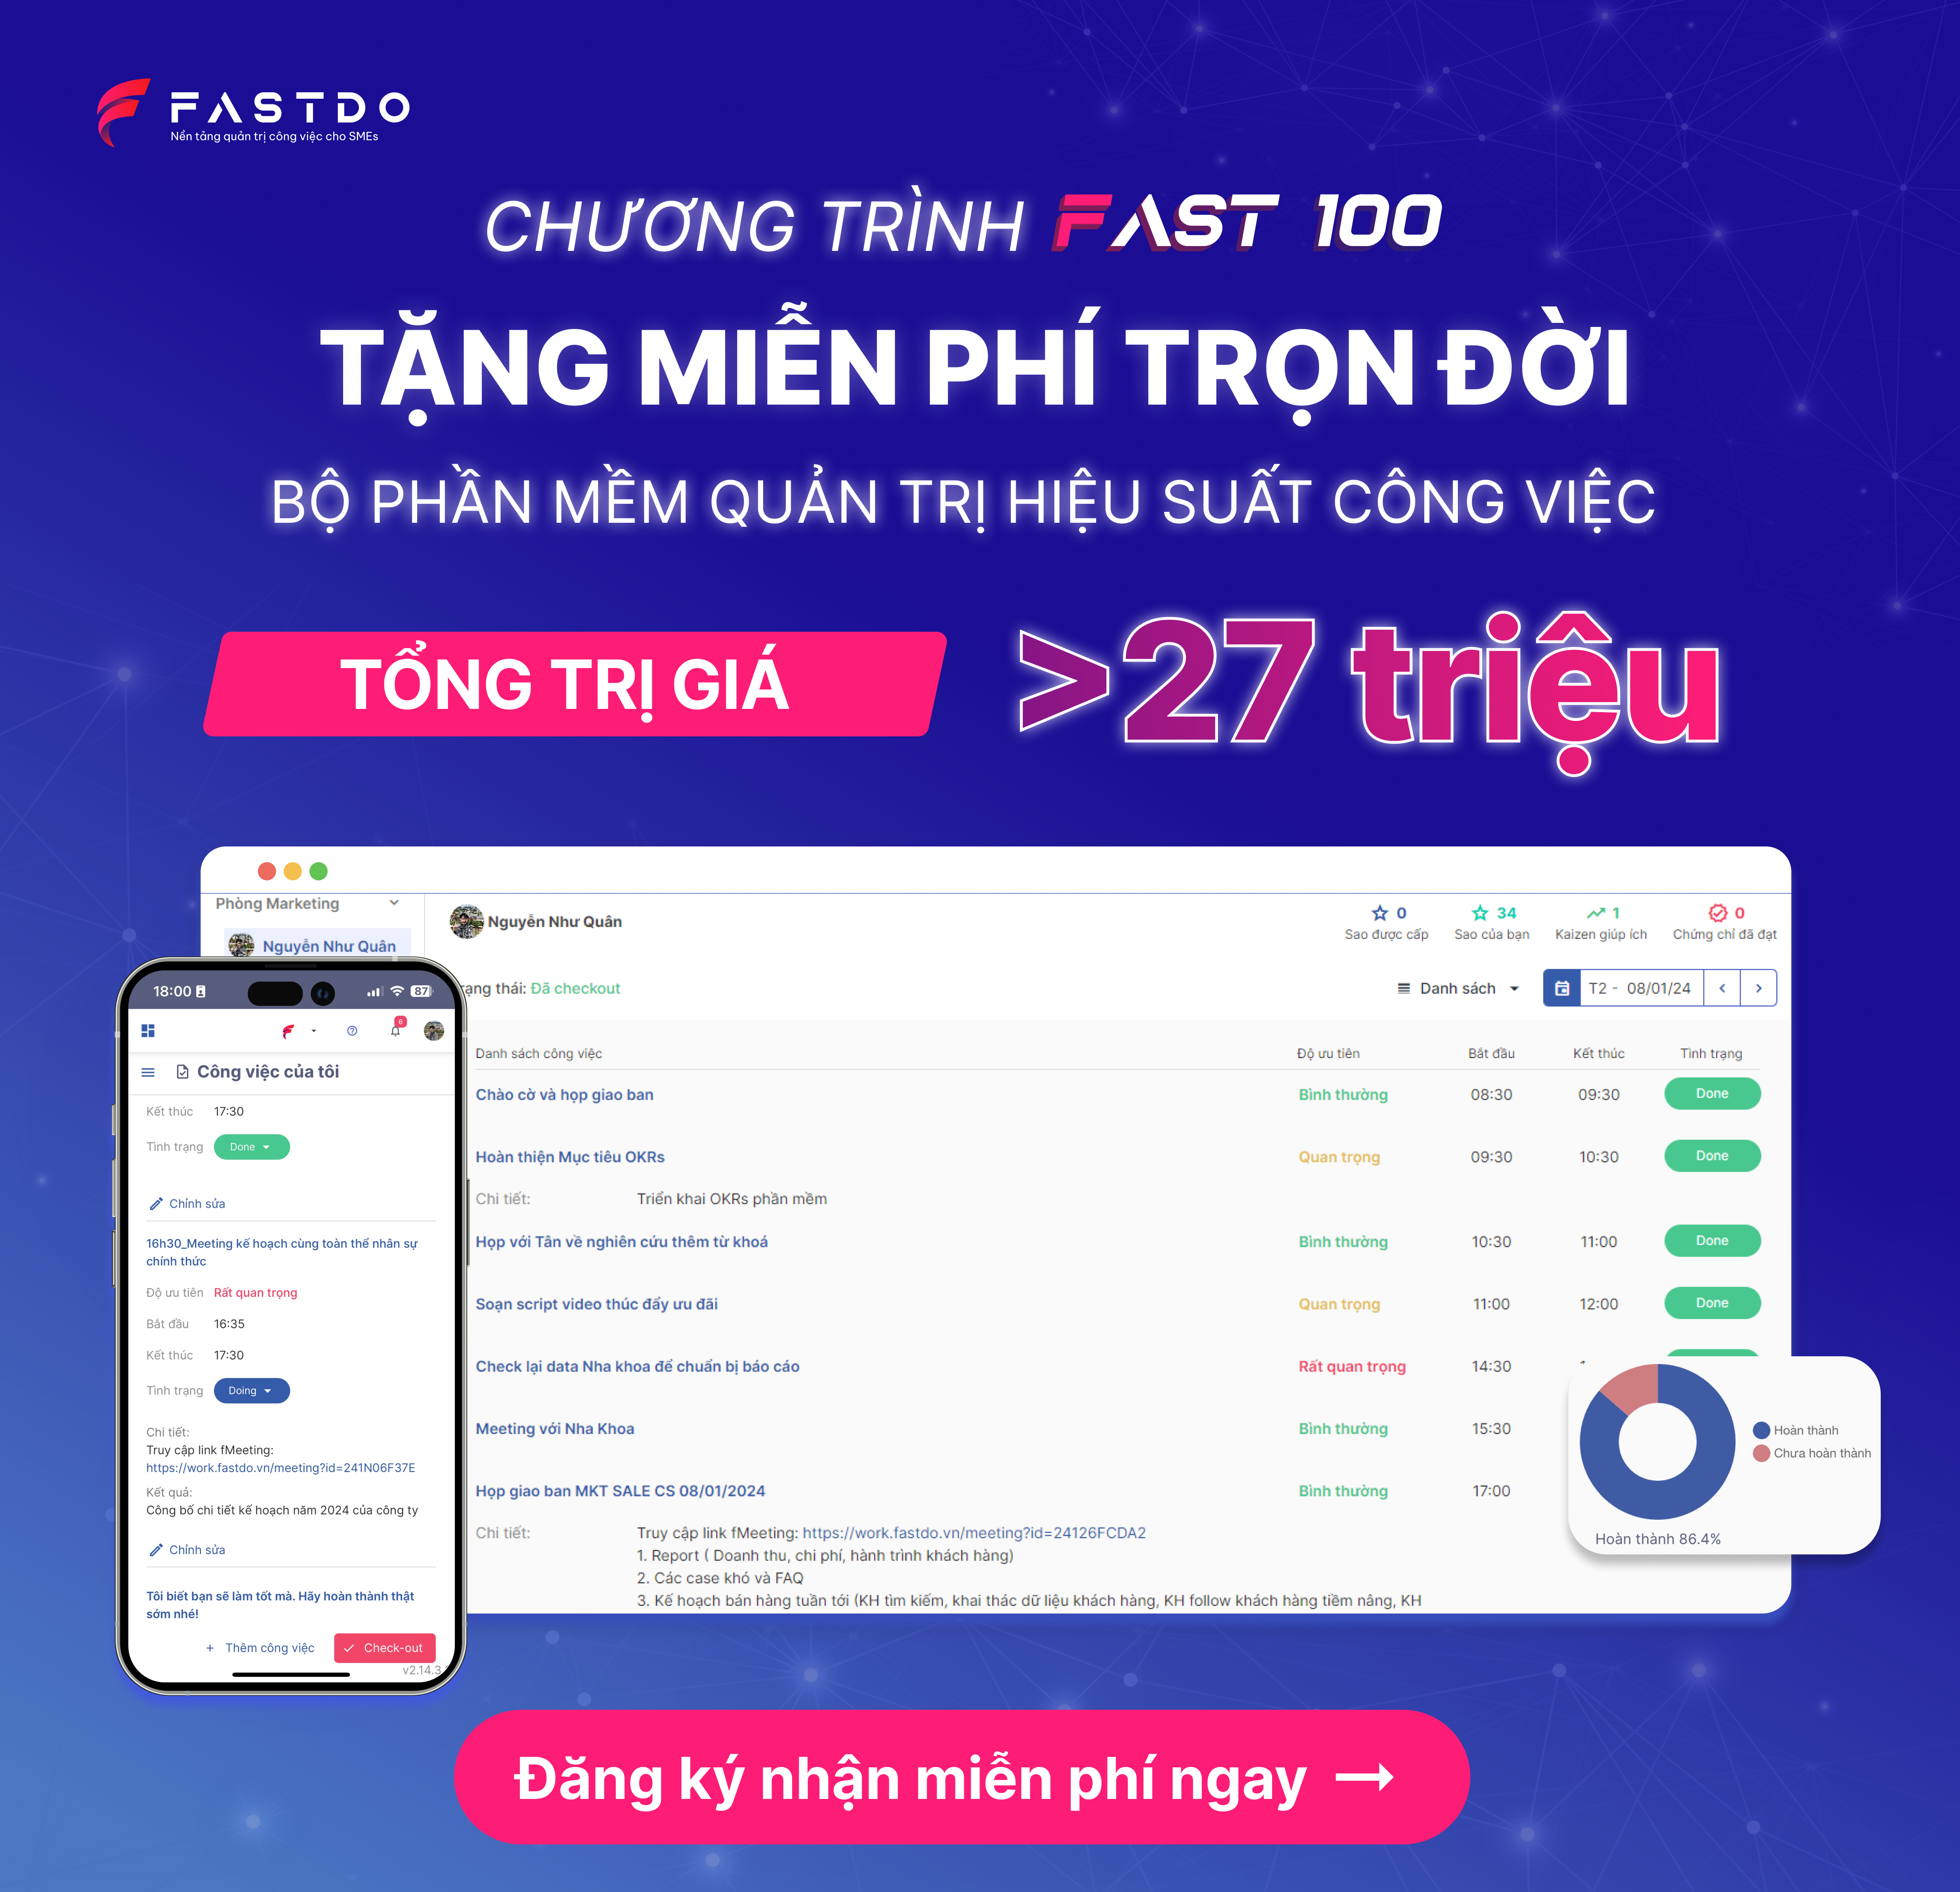 Chiến dịch Fast 100 ver 2